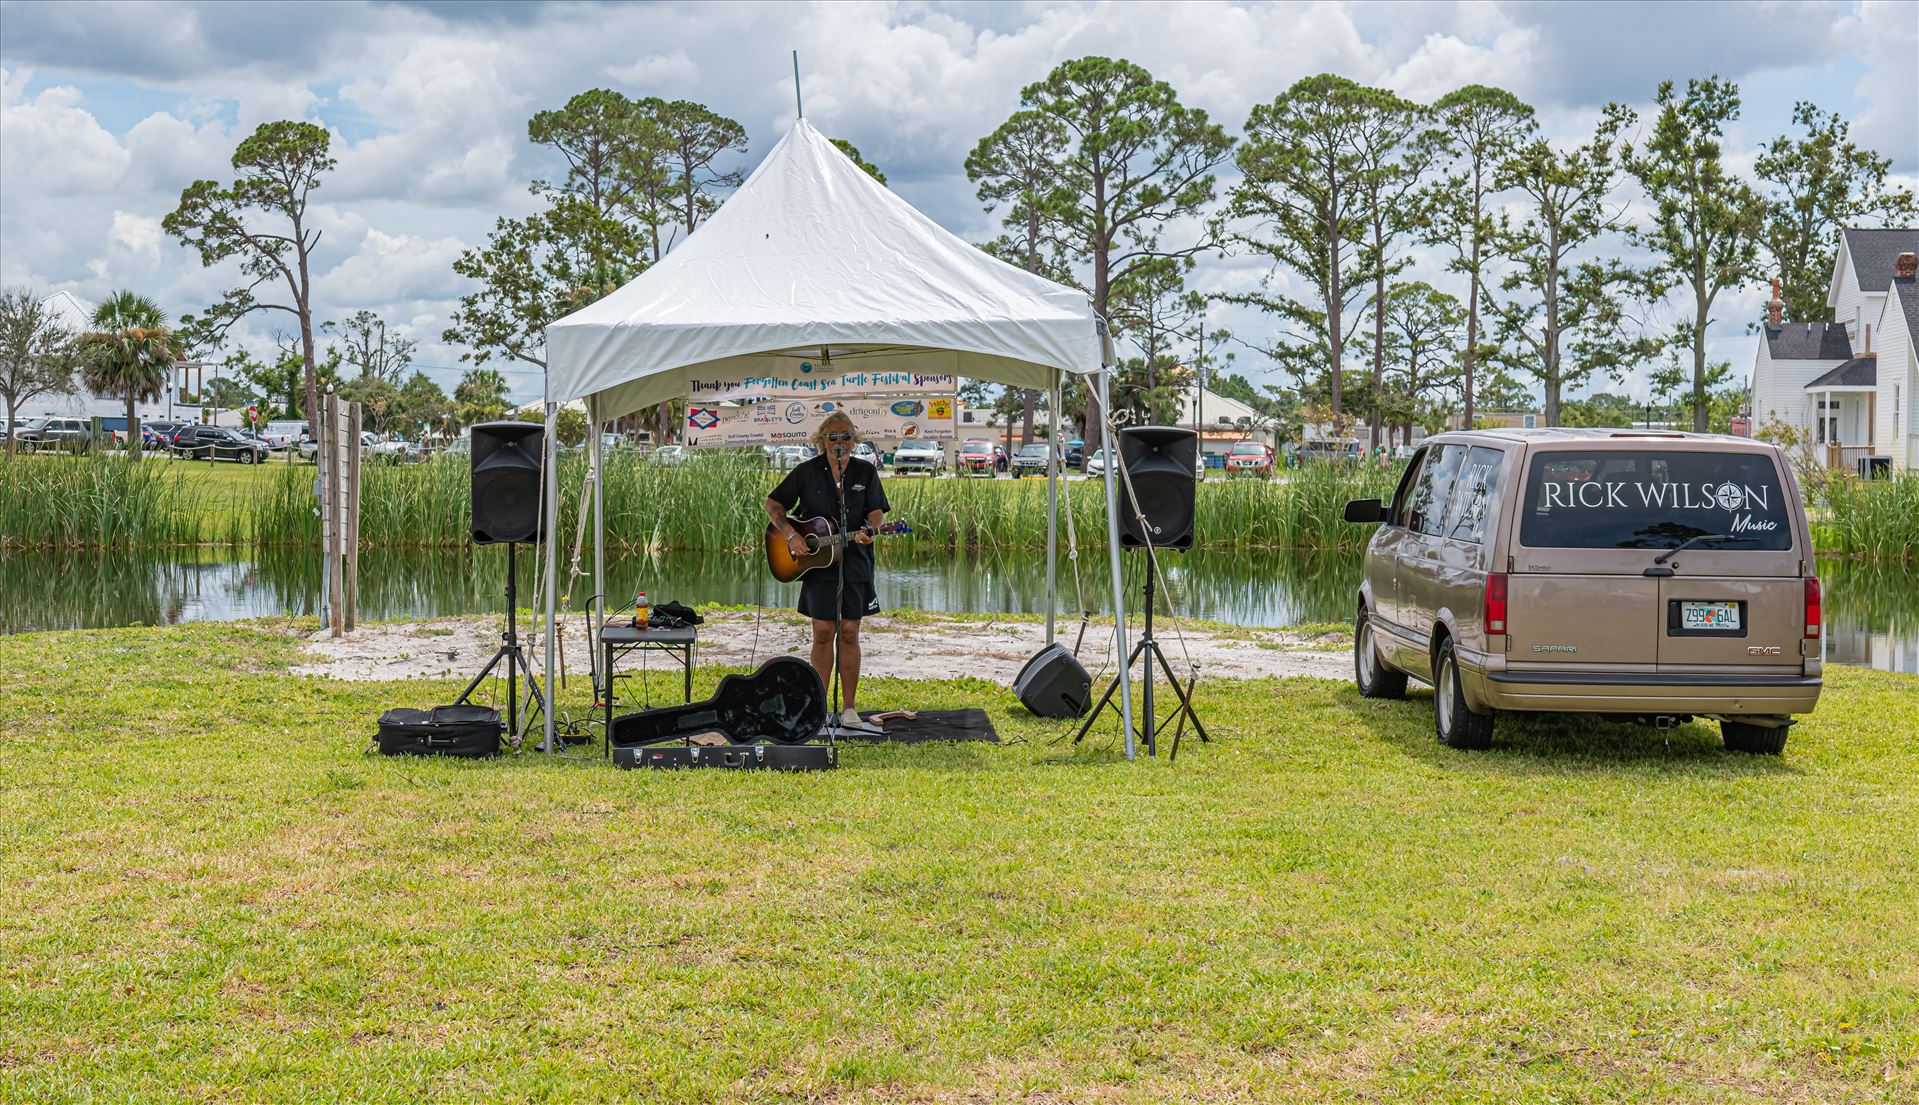 Forgotten Coast Sea Turtle Festival - June 30th, 2019  Port St. Joe, Florida at George Gore Park by Terry Kelly Photography